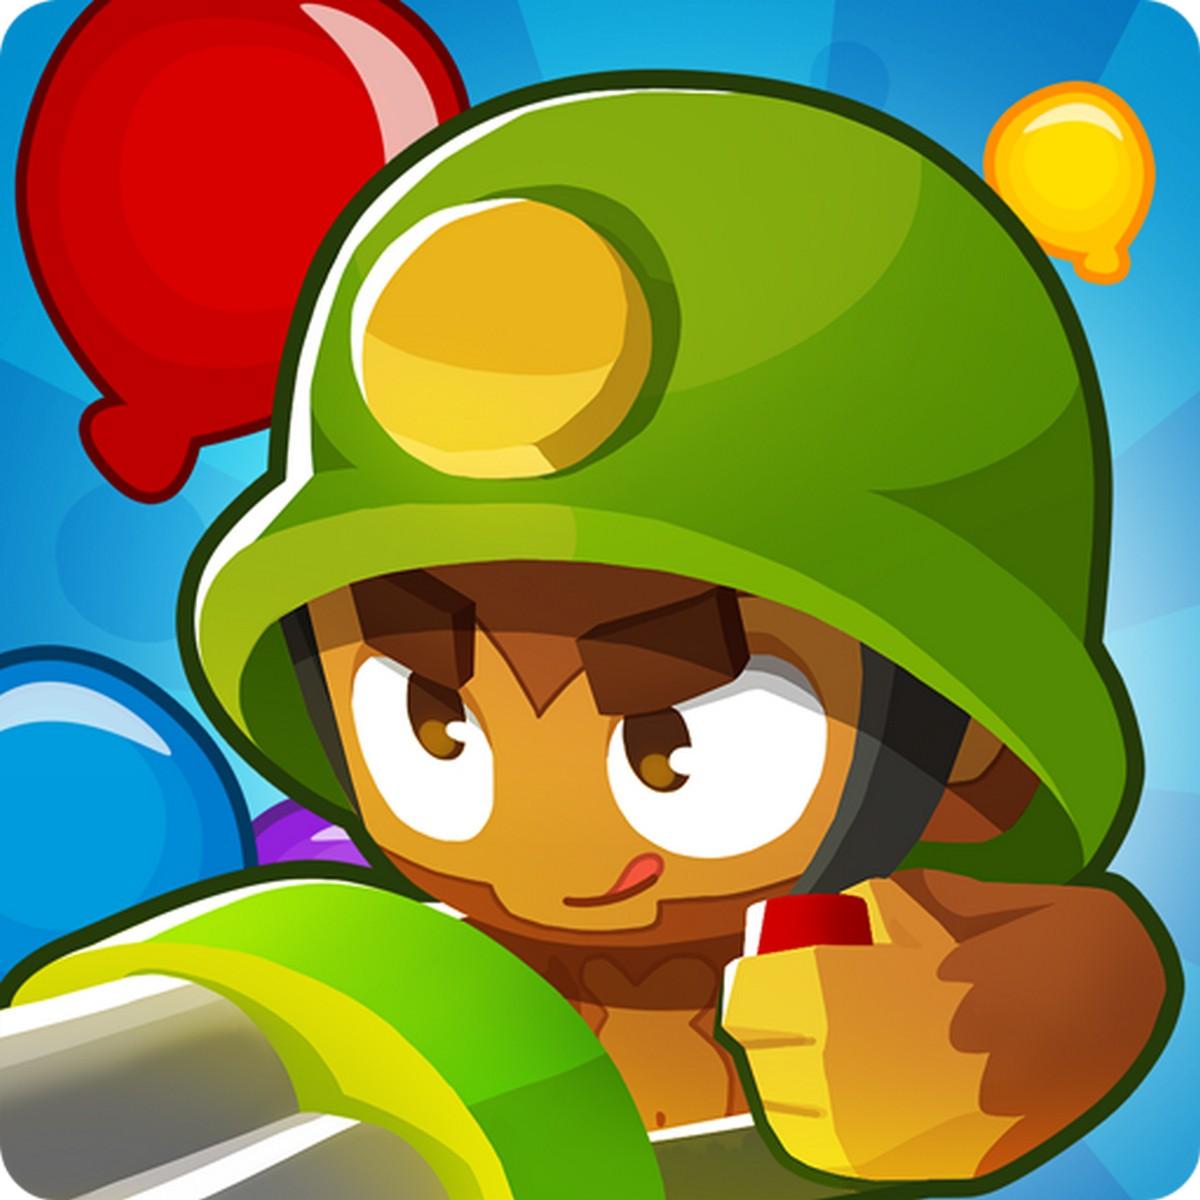 Bloons TD 6 APK MOD v22.1 (Dinero infinito)